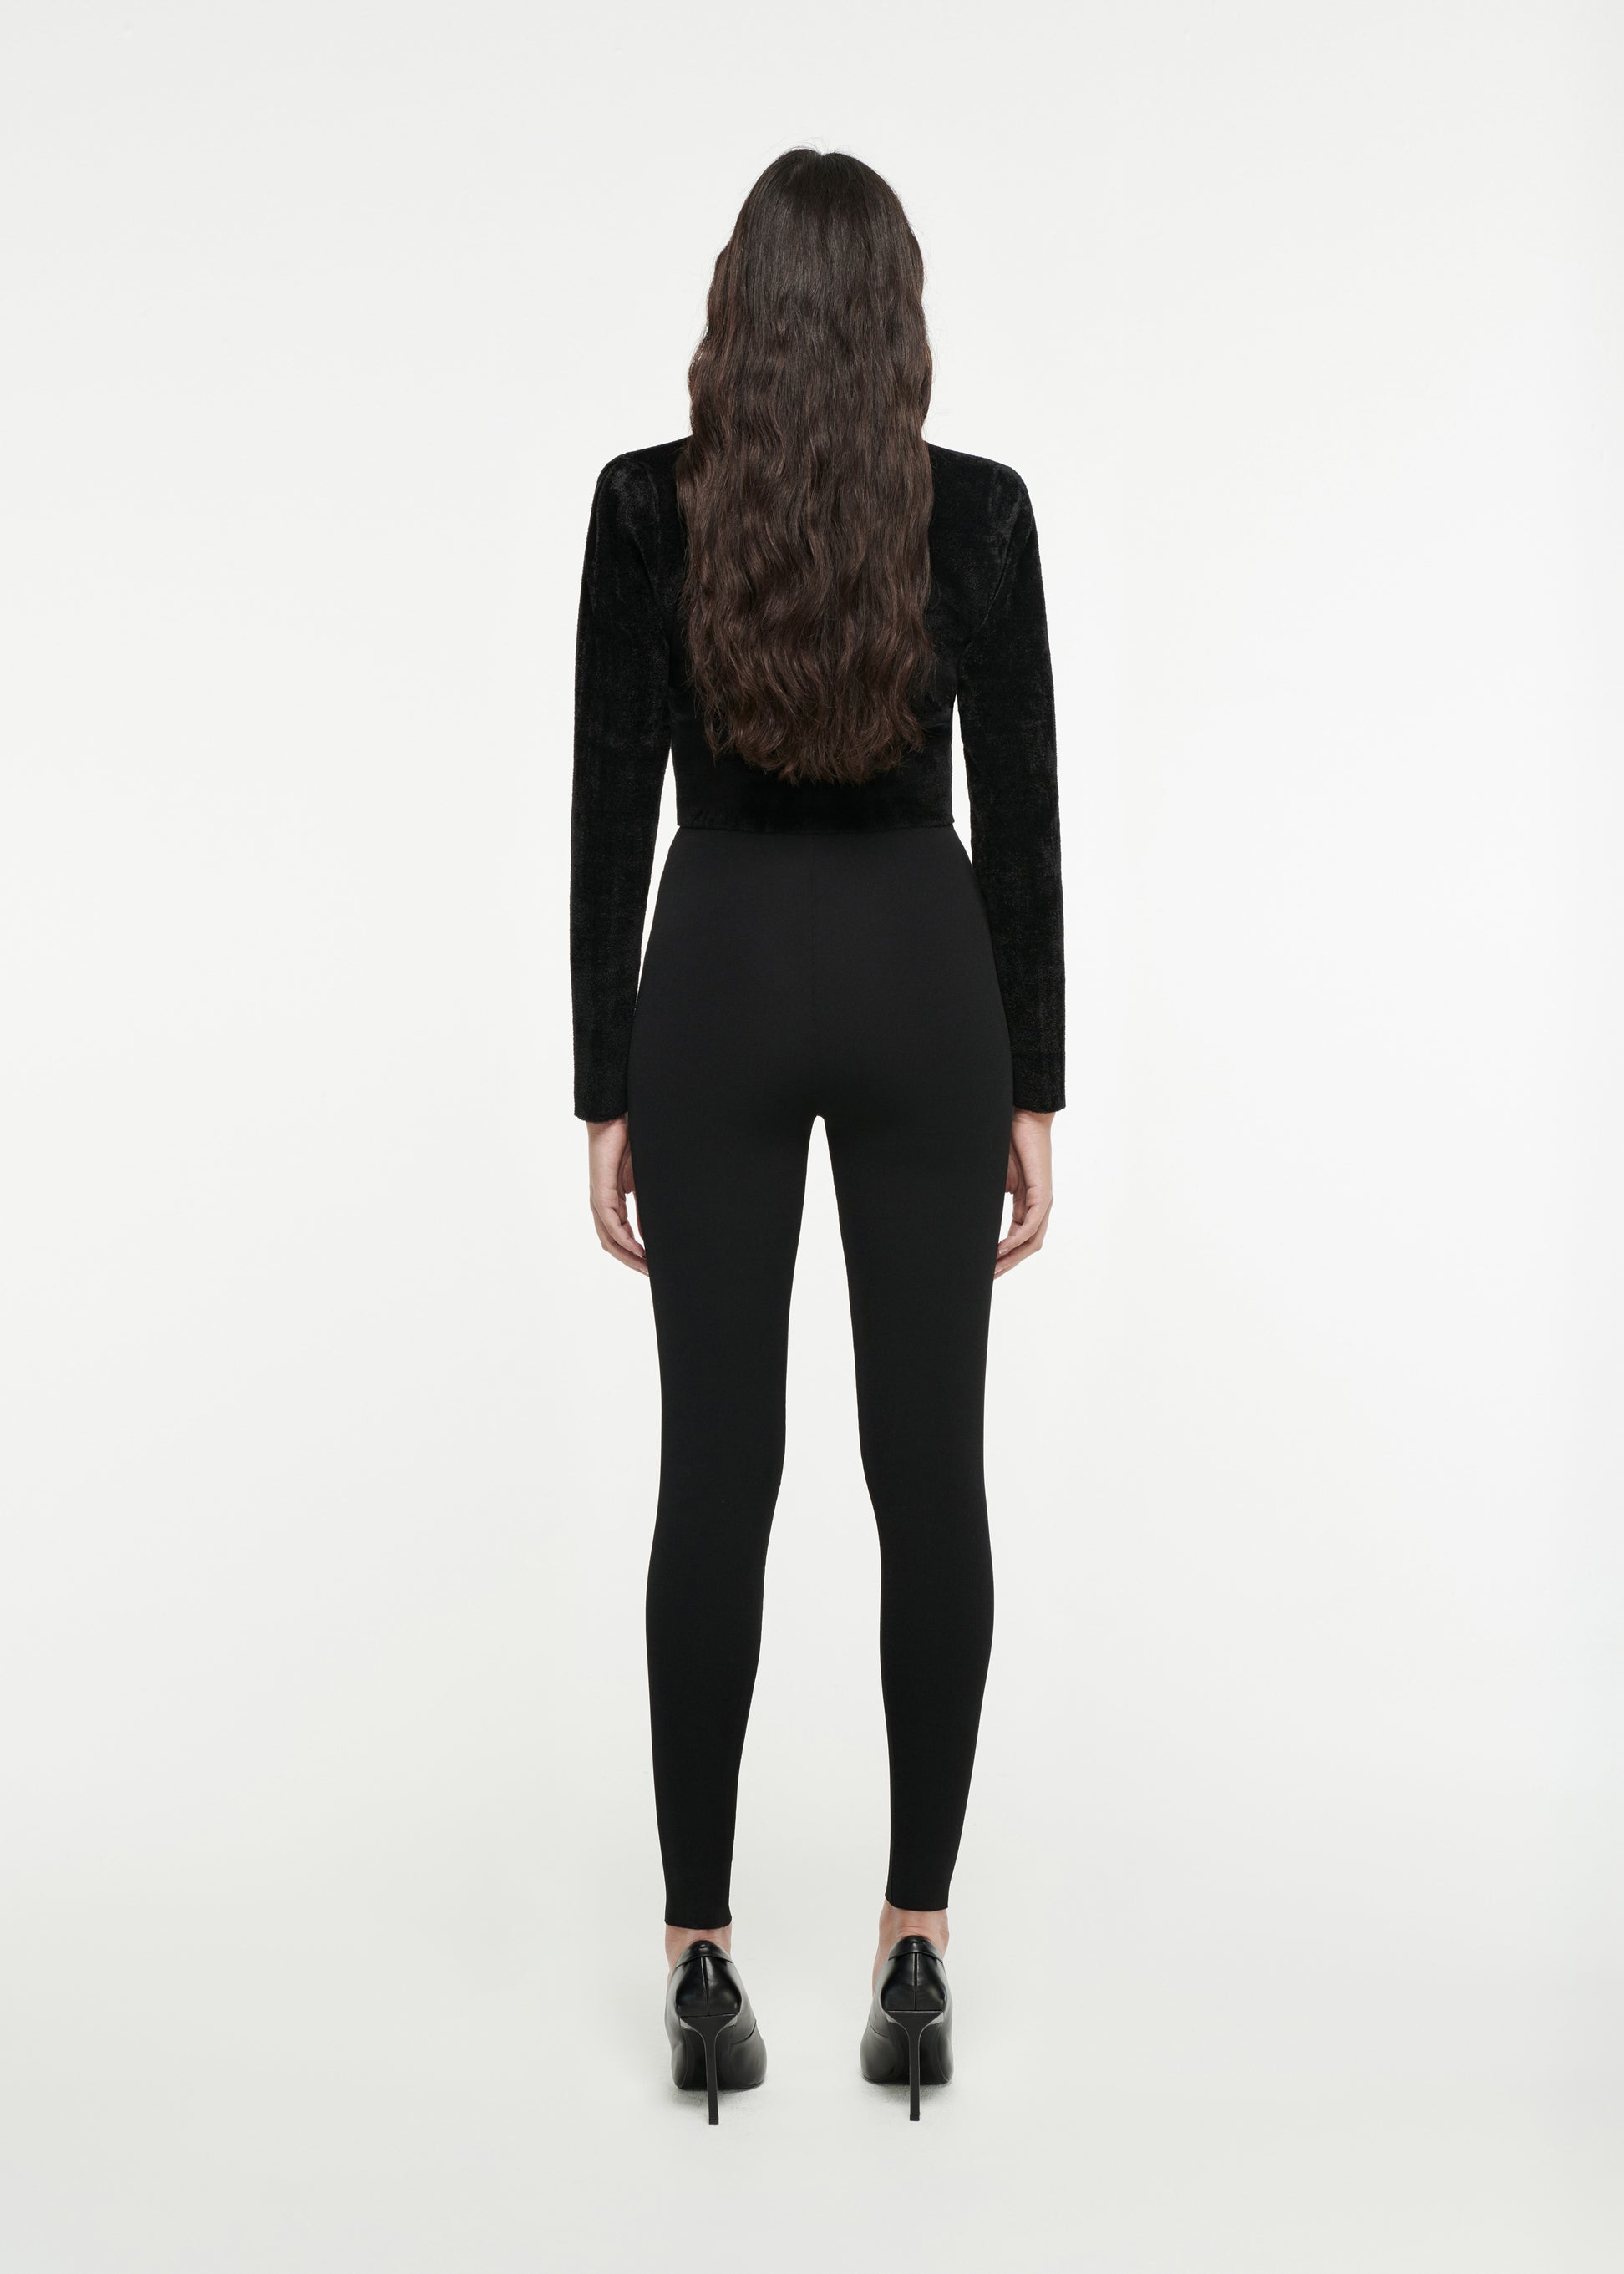 The back of a woman wearing the High-Waisted Leggings in Black